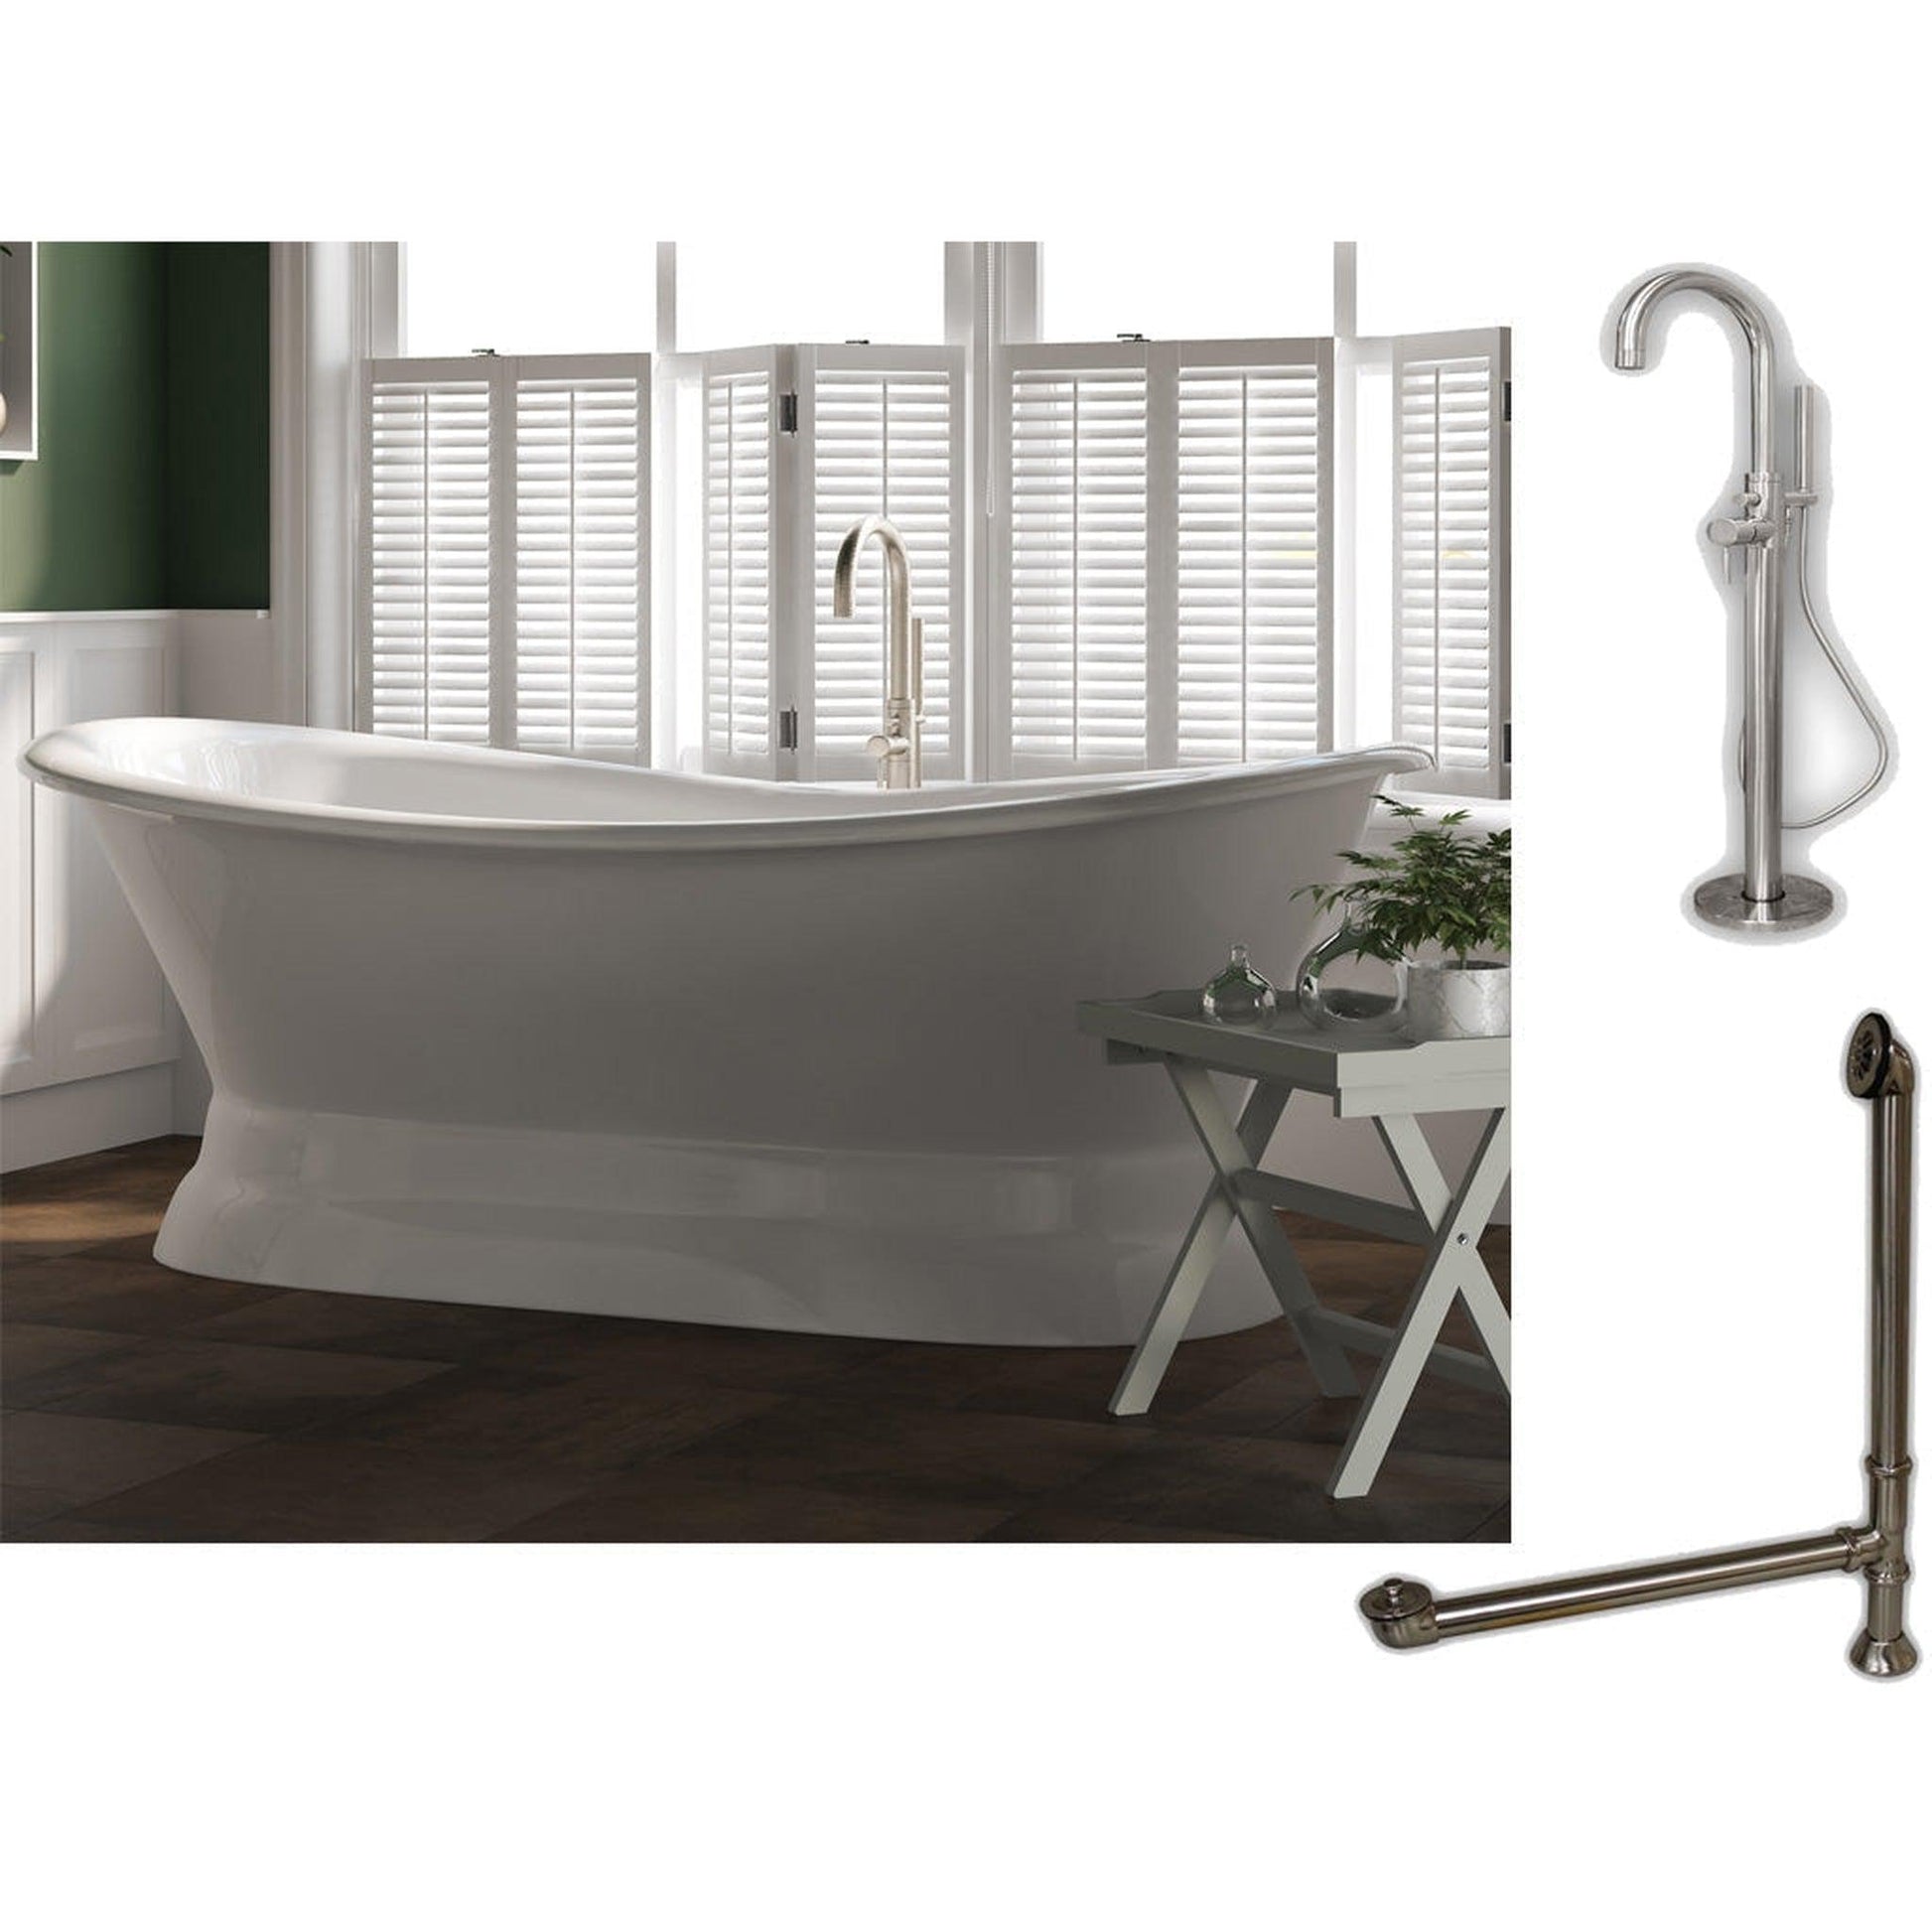 Cambridge Plumbing 71" White Cast Iron Double Slipper Pedestal Bathtub With No Faucet Holes And Complete Plumbing Package Including Modern Floor Mounted Faucet, Drain And Overflow Assembly In Brushed Nickel